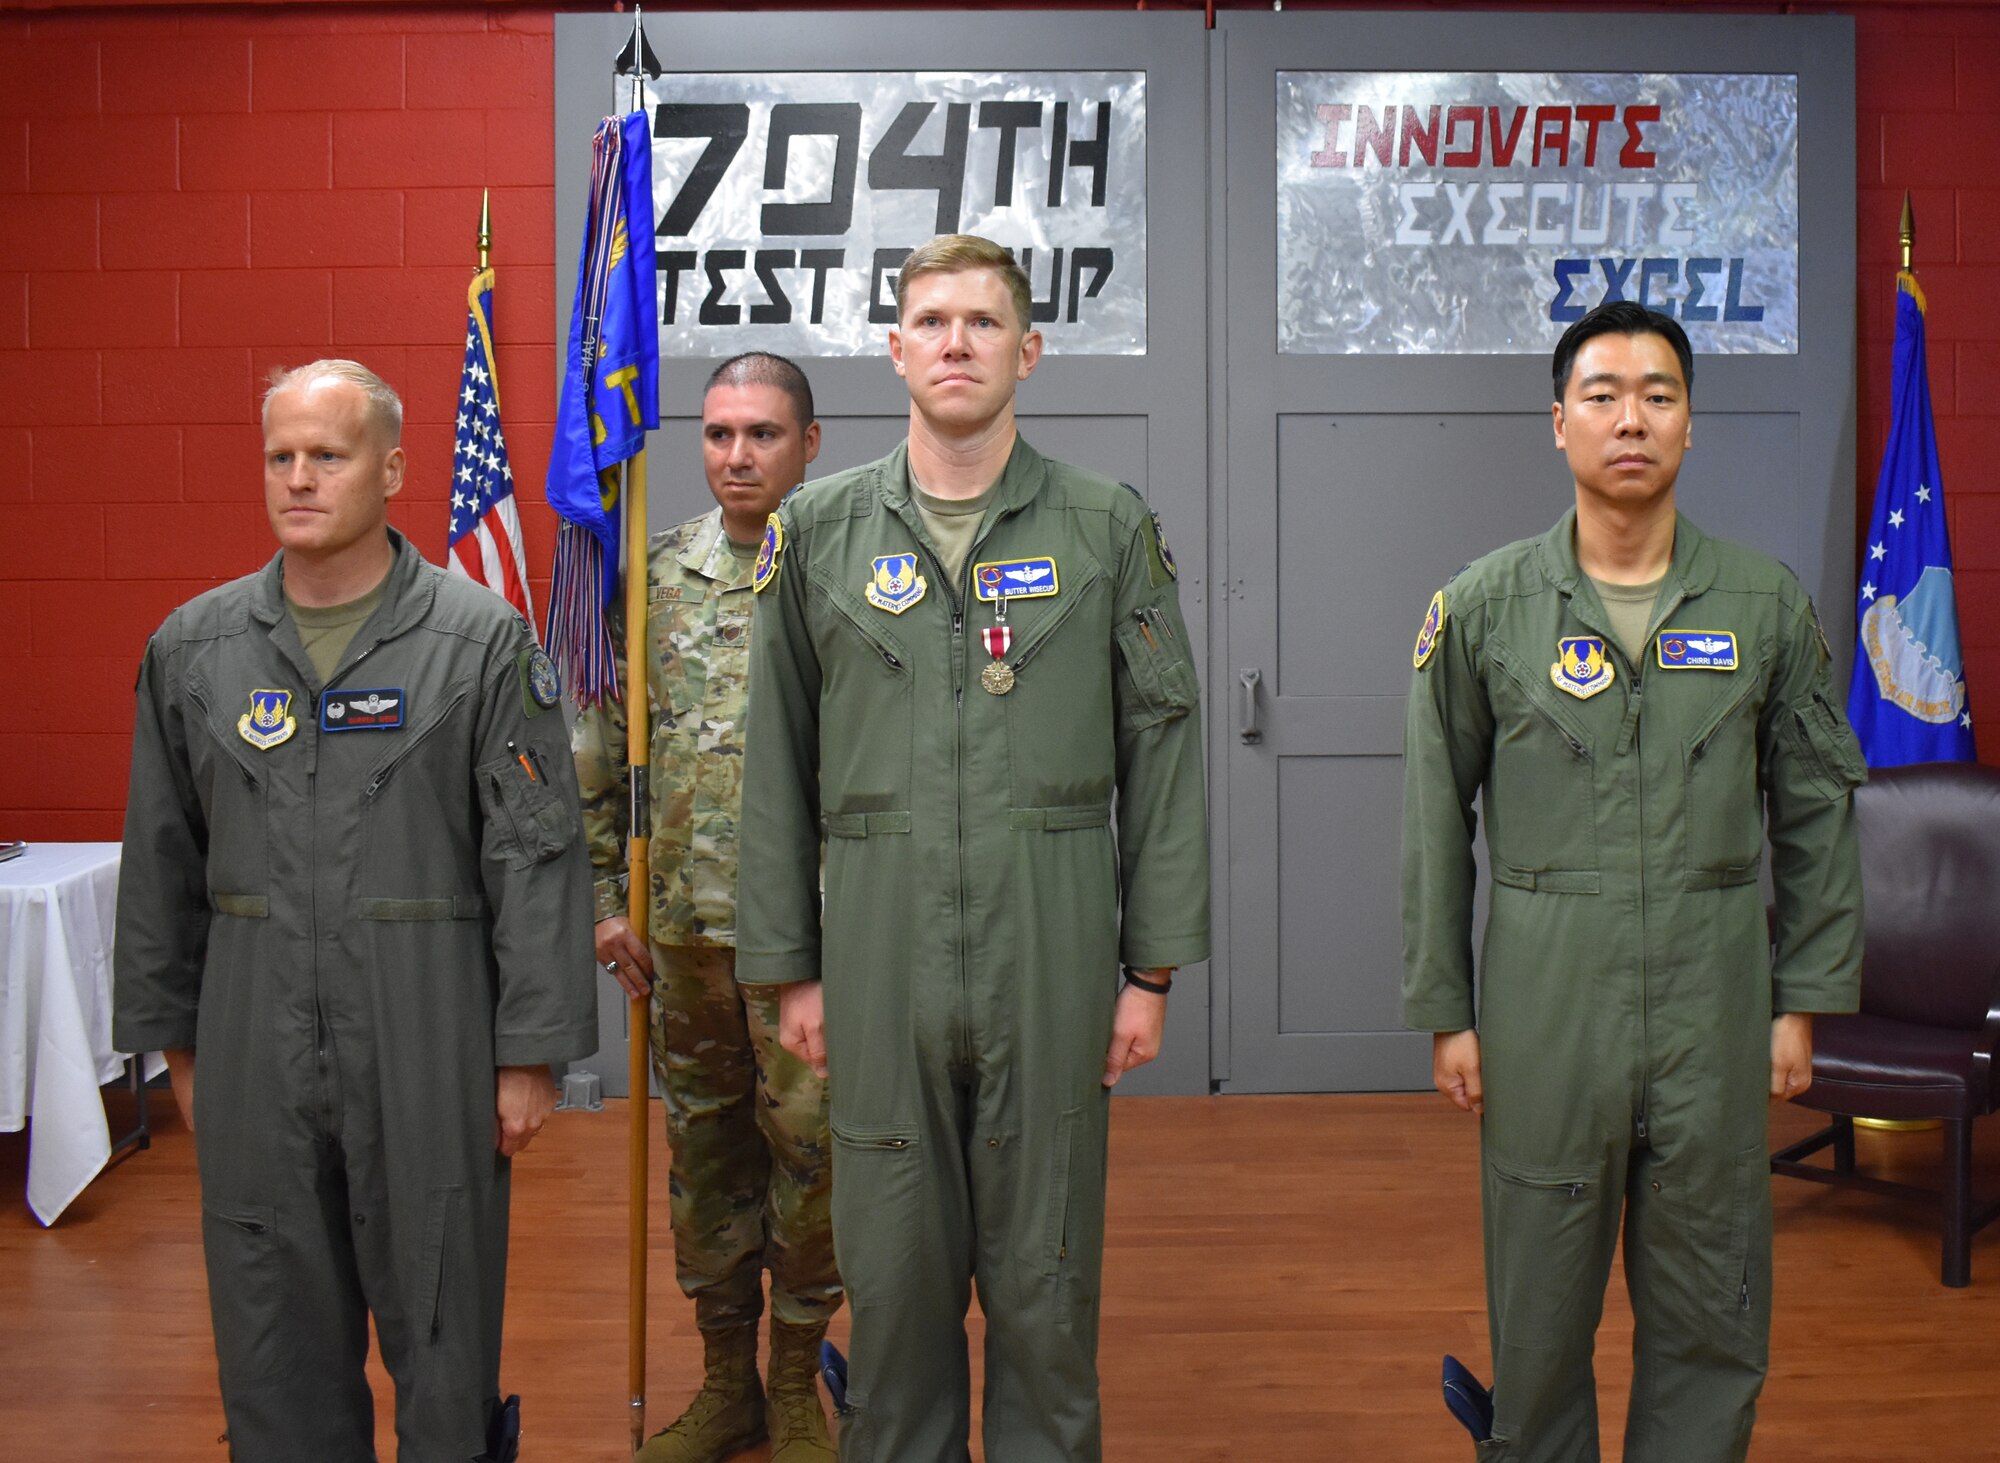 Col. Darren Wees, commander of the 746th Test Squadron, 704th Test Group, Arnold Engineering Development Complex, Lt. Col. John Wisecup and Lt. Col. Brian Davis participate in a Change of Command Ceremony at Holloman Air Force Base, New Mexico, June 8, 2022.